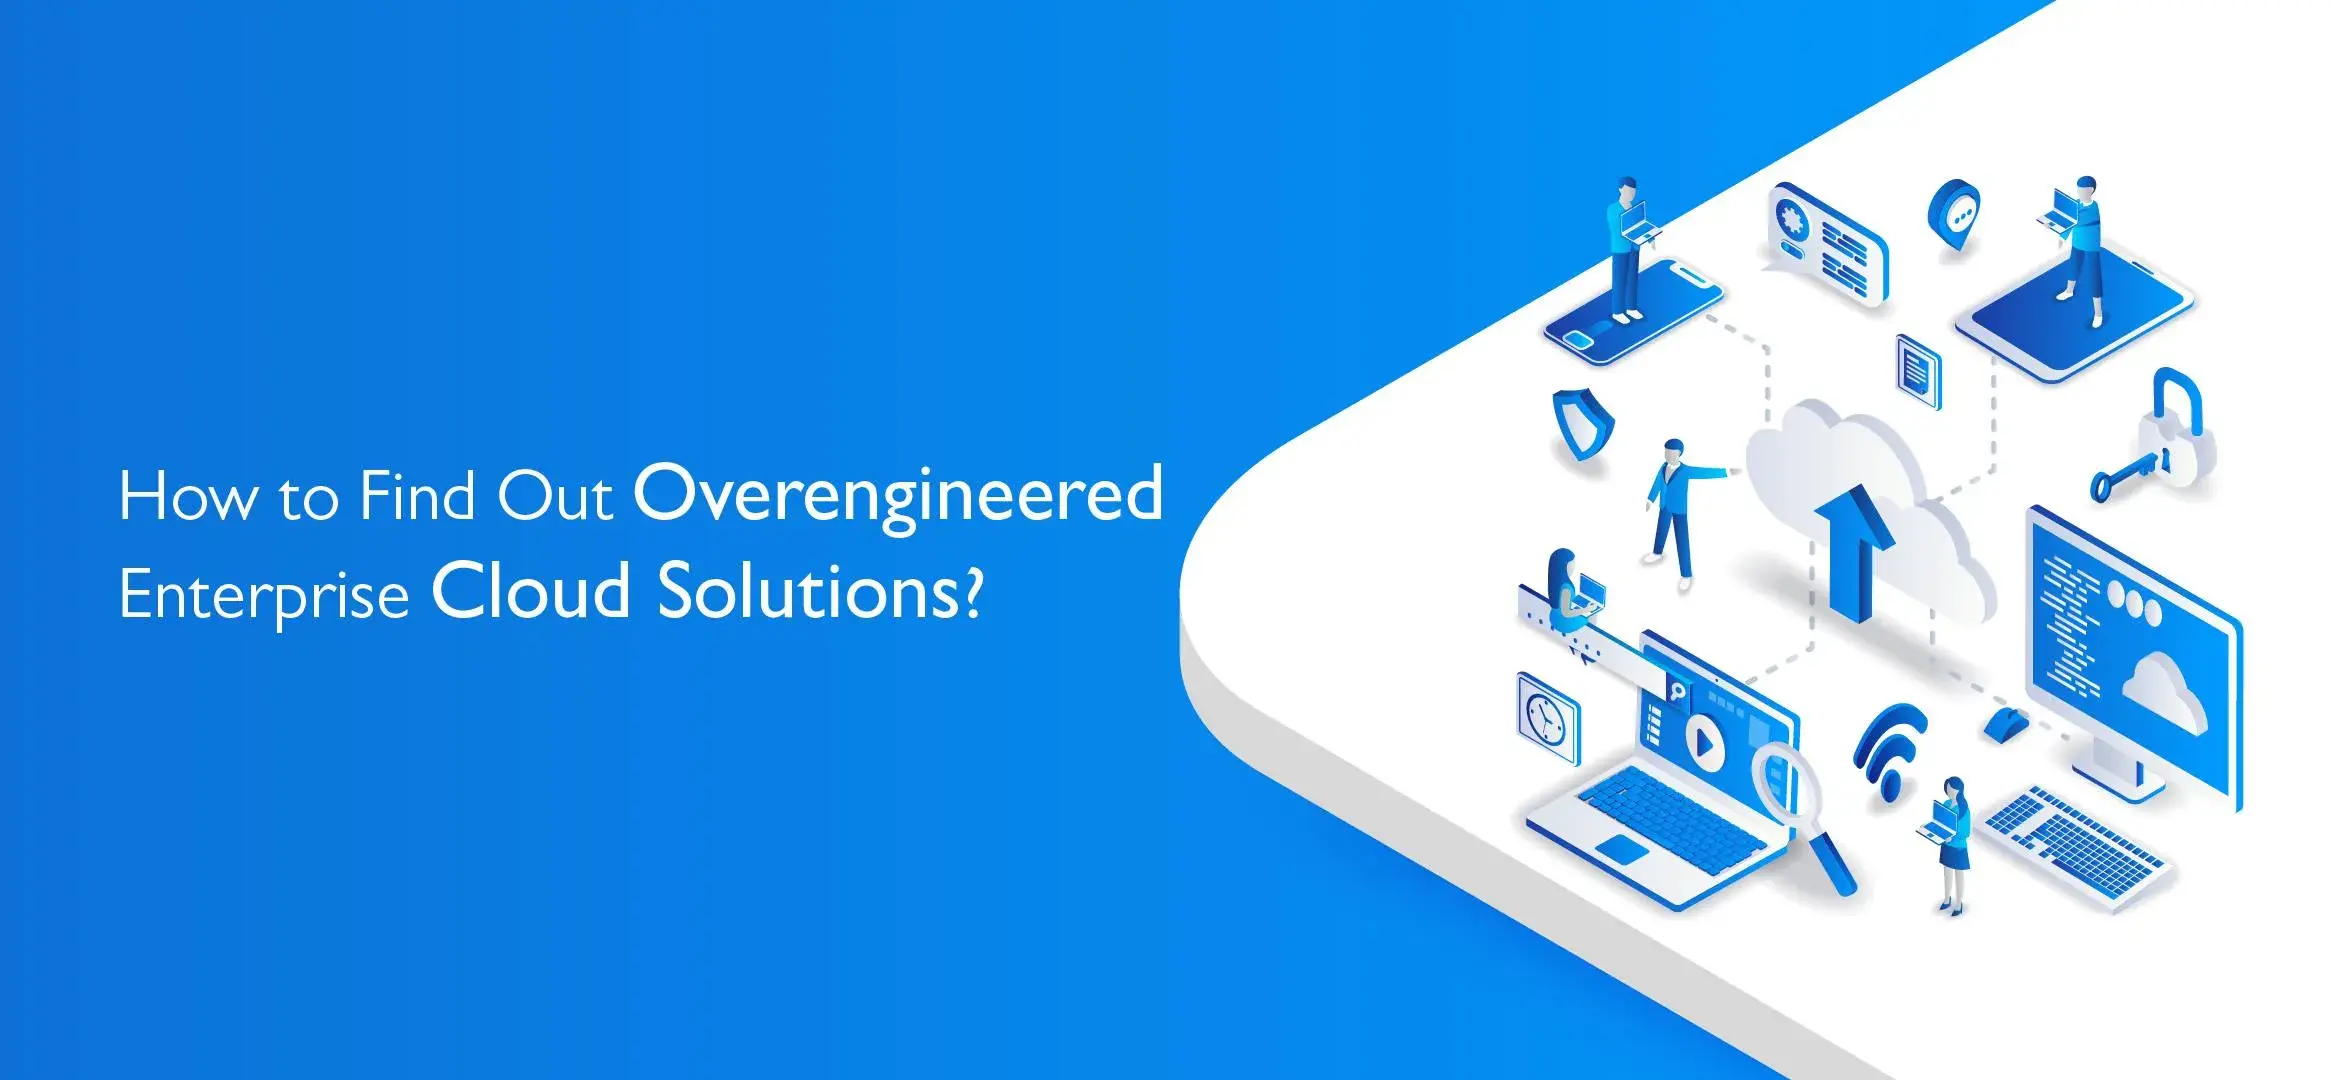 How to Find Out Overengineered Enterprise Cloud Solutions?